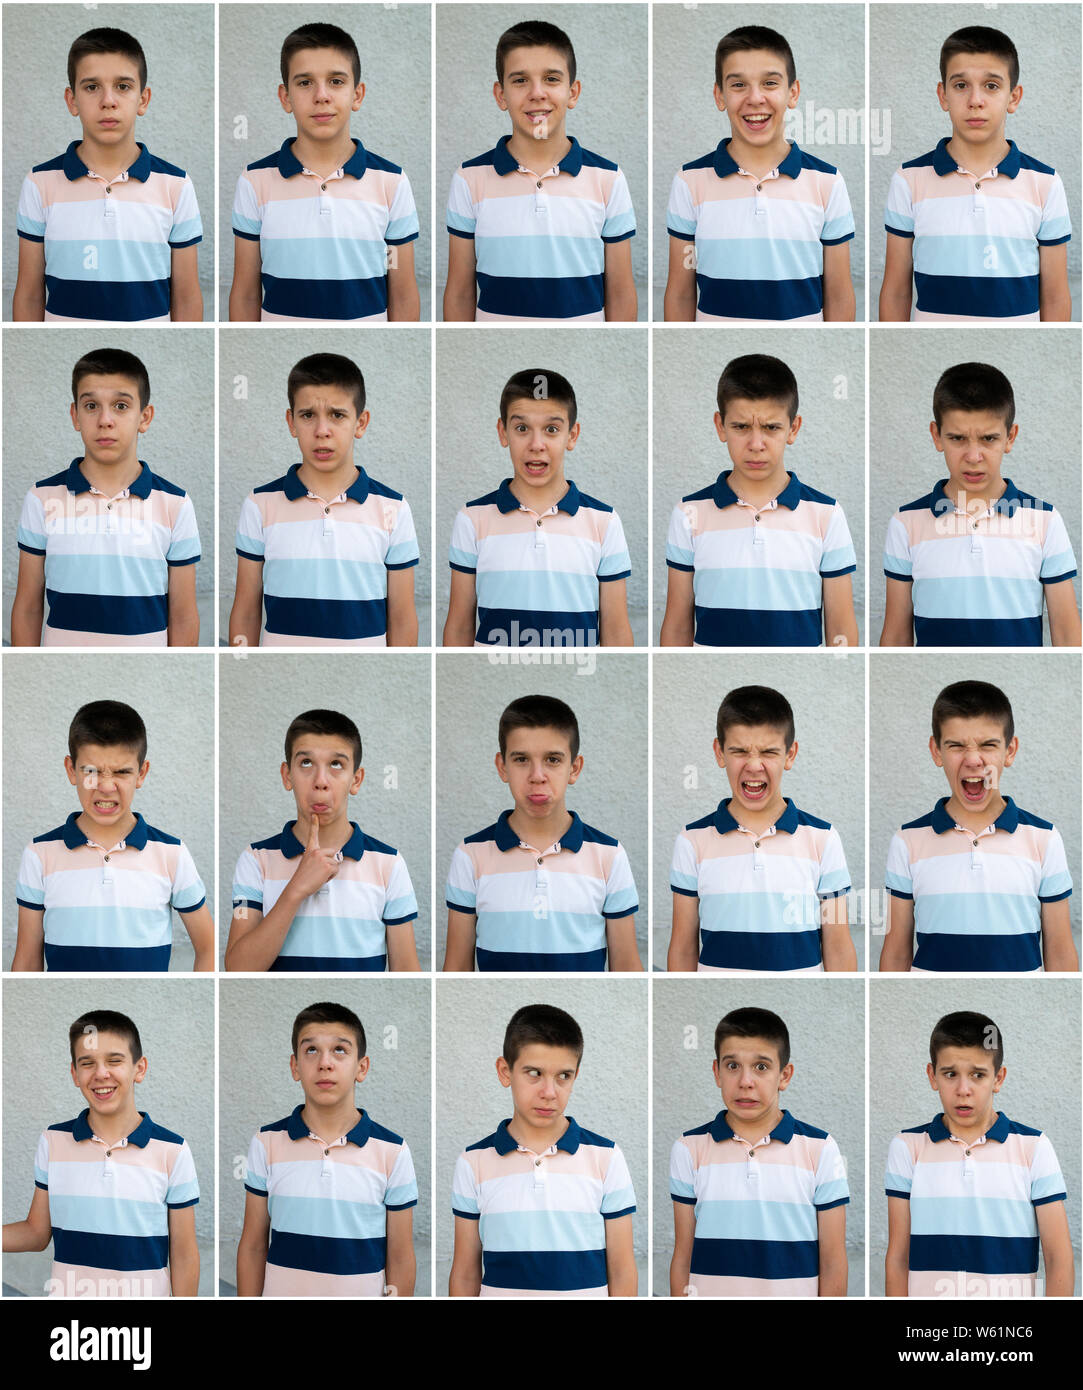 Child faces. Many faces showing emotions and expressions. Teenager face countenance. Stock Photo